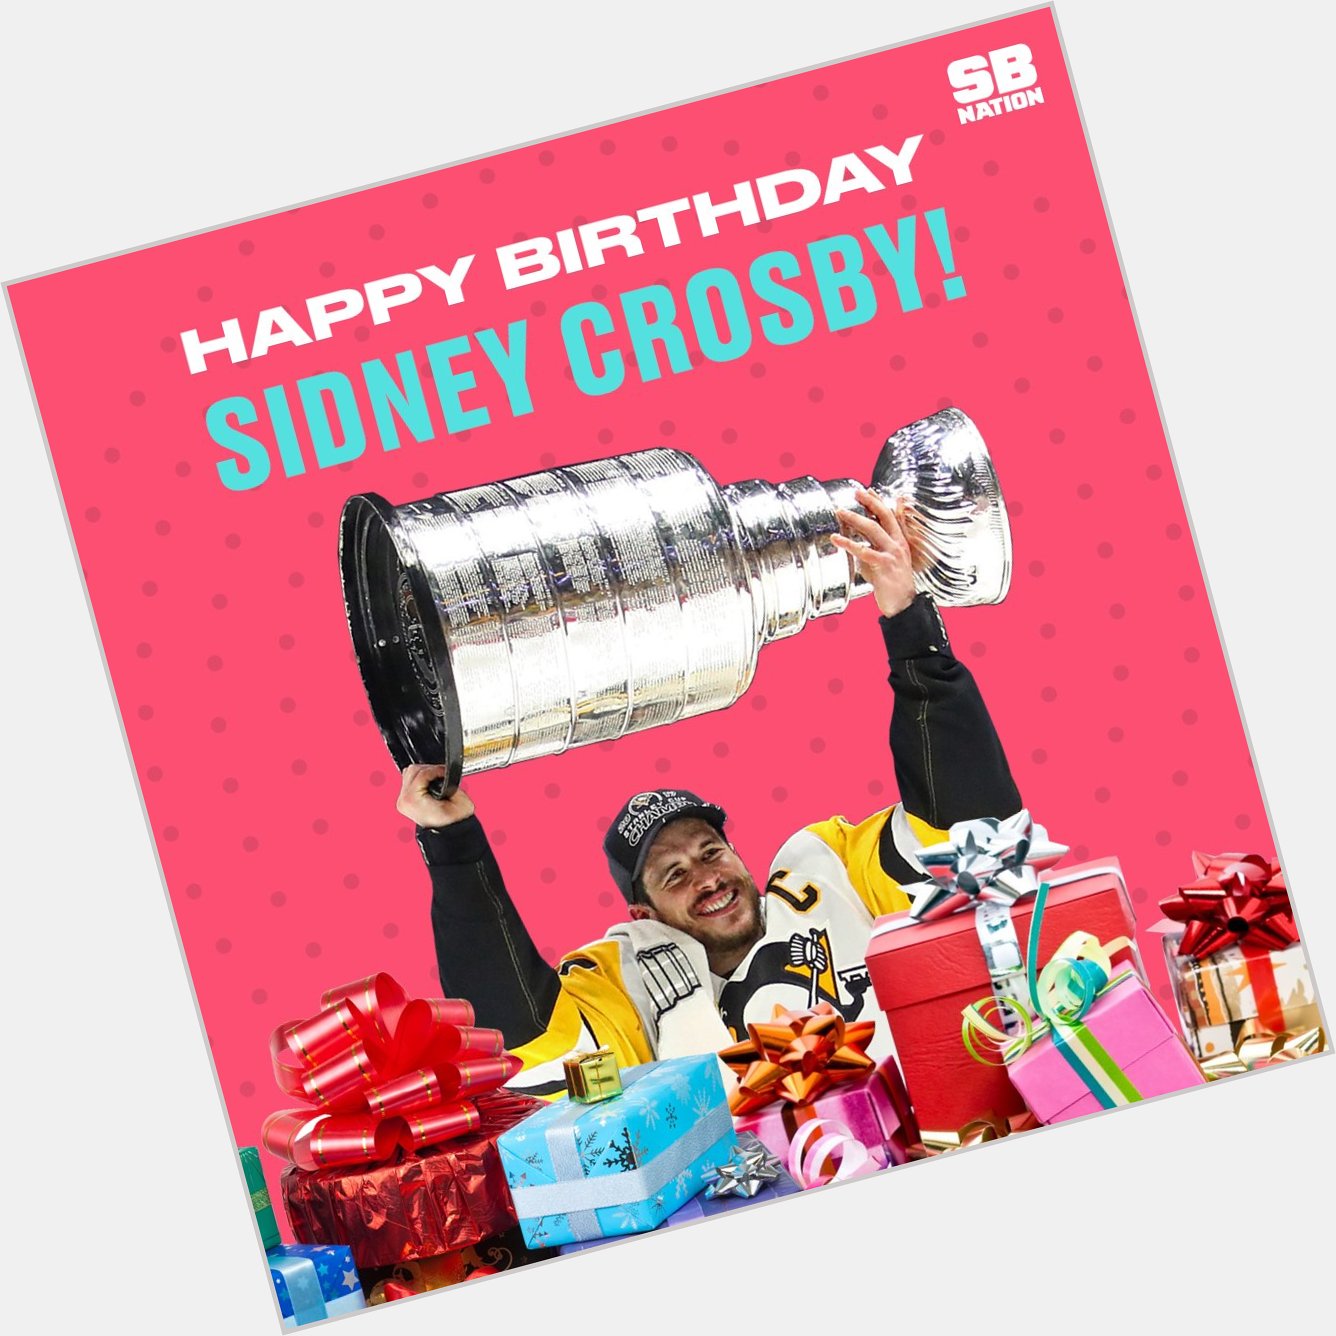 Happy birthday to three-time Stanley Cup champion, Sidney Crosby! 